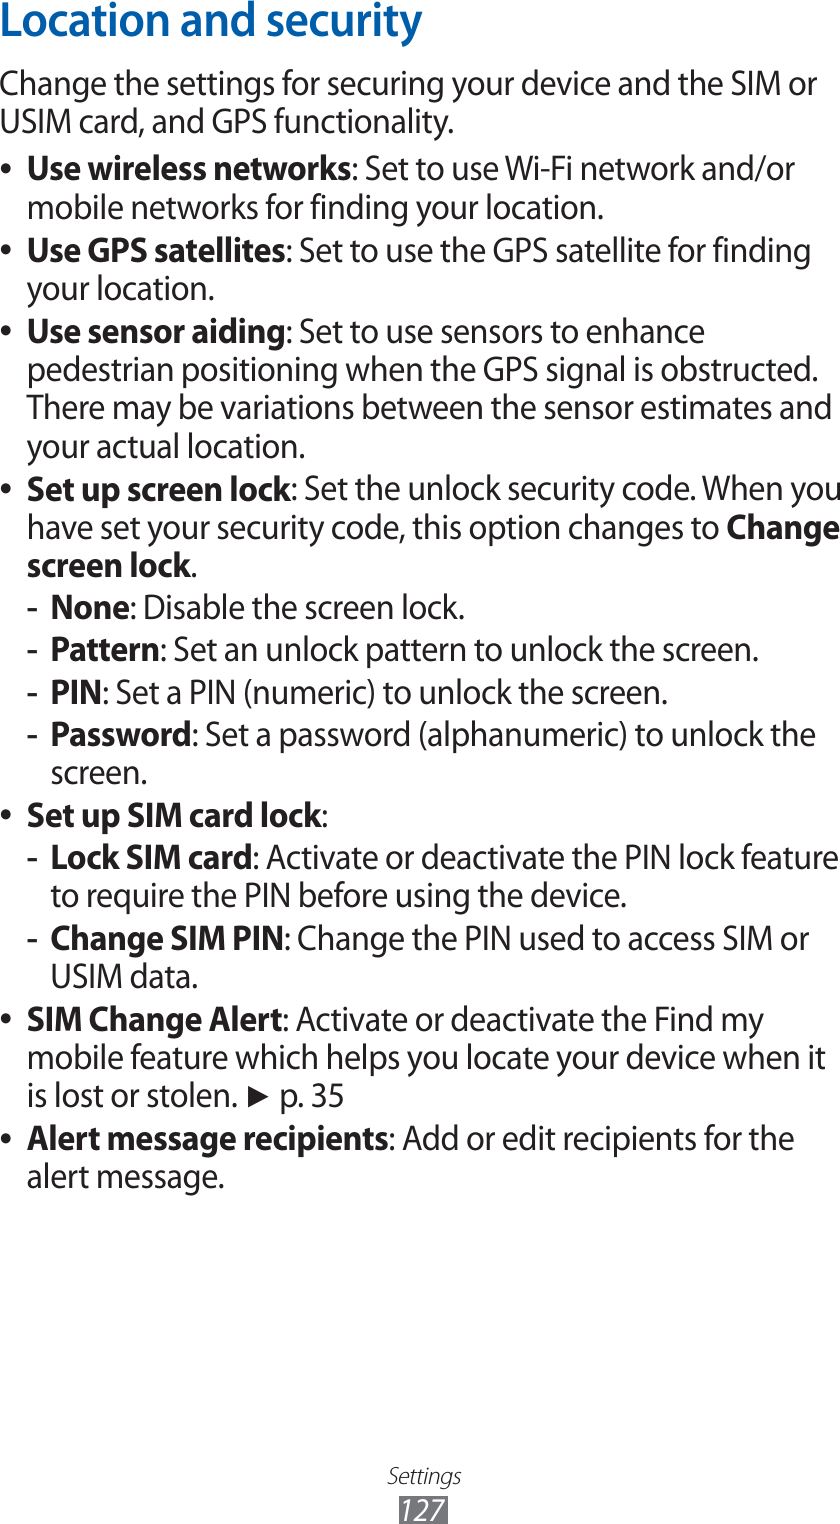 Settings127Location and securityChange the settings for securing your device and the SIM or USIM card, and GPS functionality.Use wireless networks ●: Set to use Wi-Fi network and/or mobile networks for finding your location.Use GPS satellites ●: Set to use the GPS satellite for finding your location.Use sensor aiding ●: Set to use sensors to enhance pedestrian positioning when the GPS signal is obstructed. There may be variations between the sensor estimates and your actual location.Set up screen lock ●: Set the unlock security code. When you have set your security code, this option changes to Change screen lock.None -: Disable the screen lock.Pattern -: Set an unlock pattern to unlock the screen.PIN -: Set a PIN (numeric) to unlock the screen.Password -: Set a password (alphanumeric) to unlock the screen.Set up SIM card lock ●:Lock SIM card -: Activate or deactivate the PIN lock feature to require the PIN before using the device.Change SIM PIN -: Change the PIN used to access SIM or USIM data.SIM Change Alert ●: Activate or deactivate the Find my mobile feature which helps you locate your device when it is lost or stolen. ► p. 35Alert message recipients ●: Add or edit recipients for the alert message.